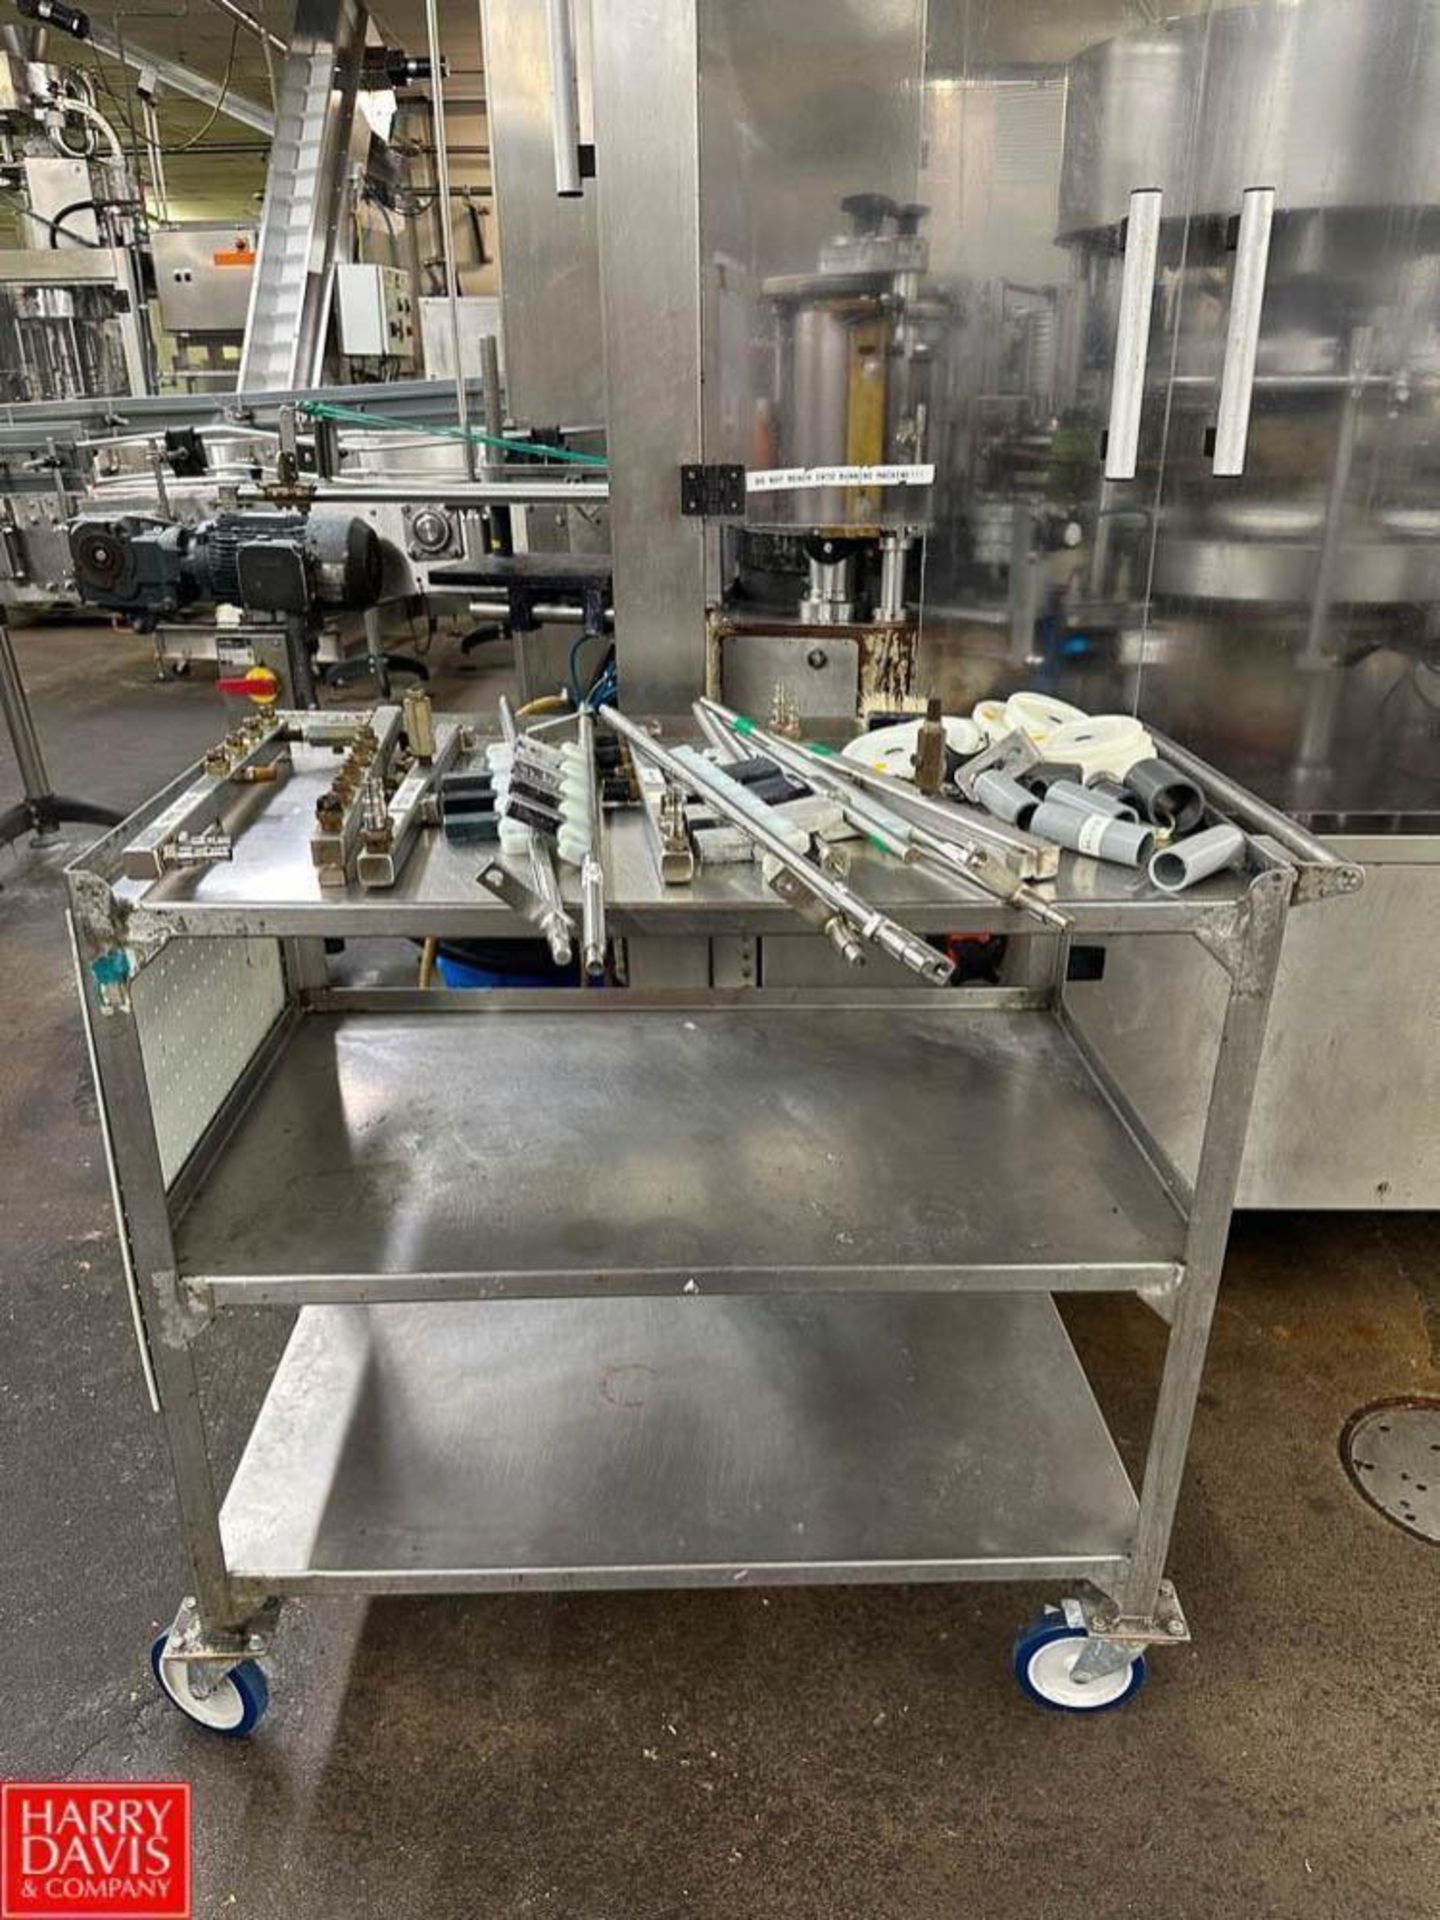 2019 Gernep 10-Station Cut & Stack Cold Glue Labeling Machine, Model: Labetta with Siemens 10-Head - Image 5 of 7